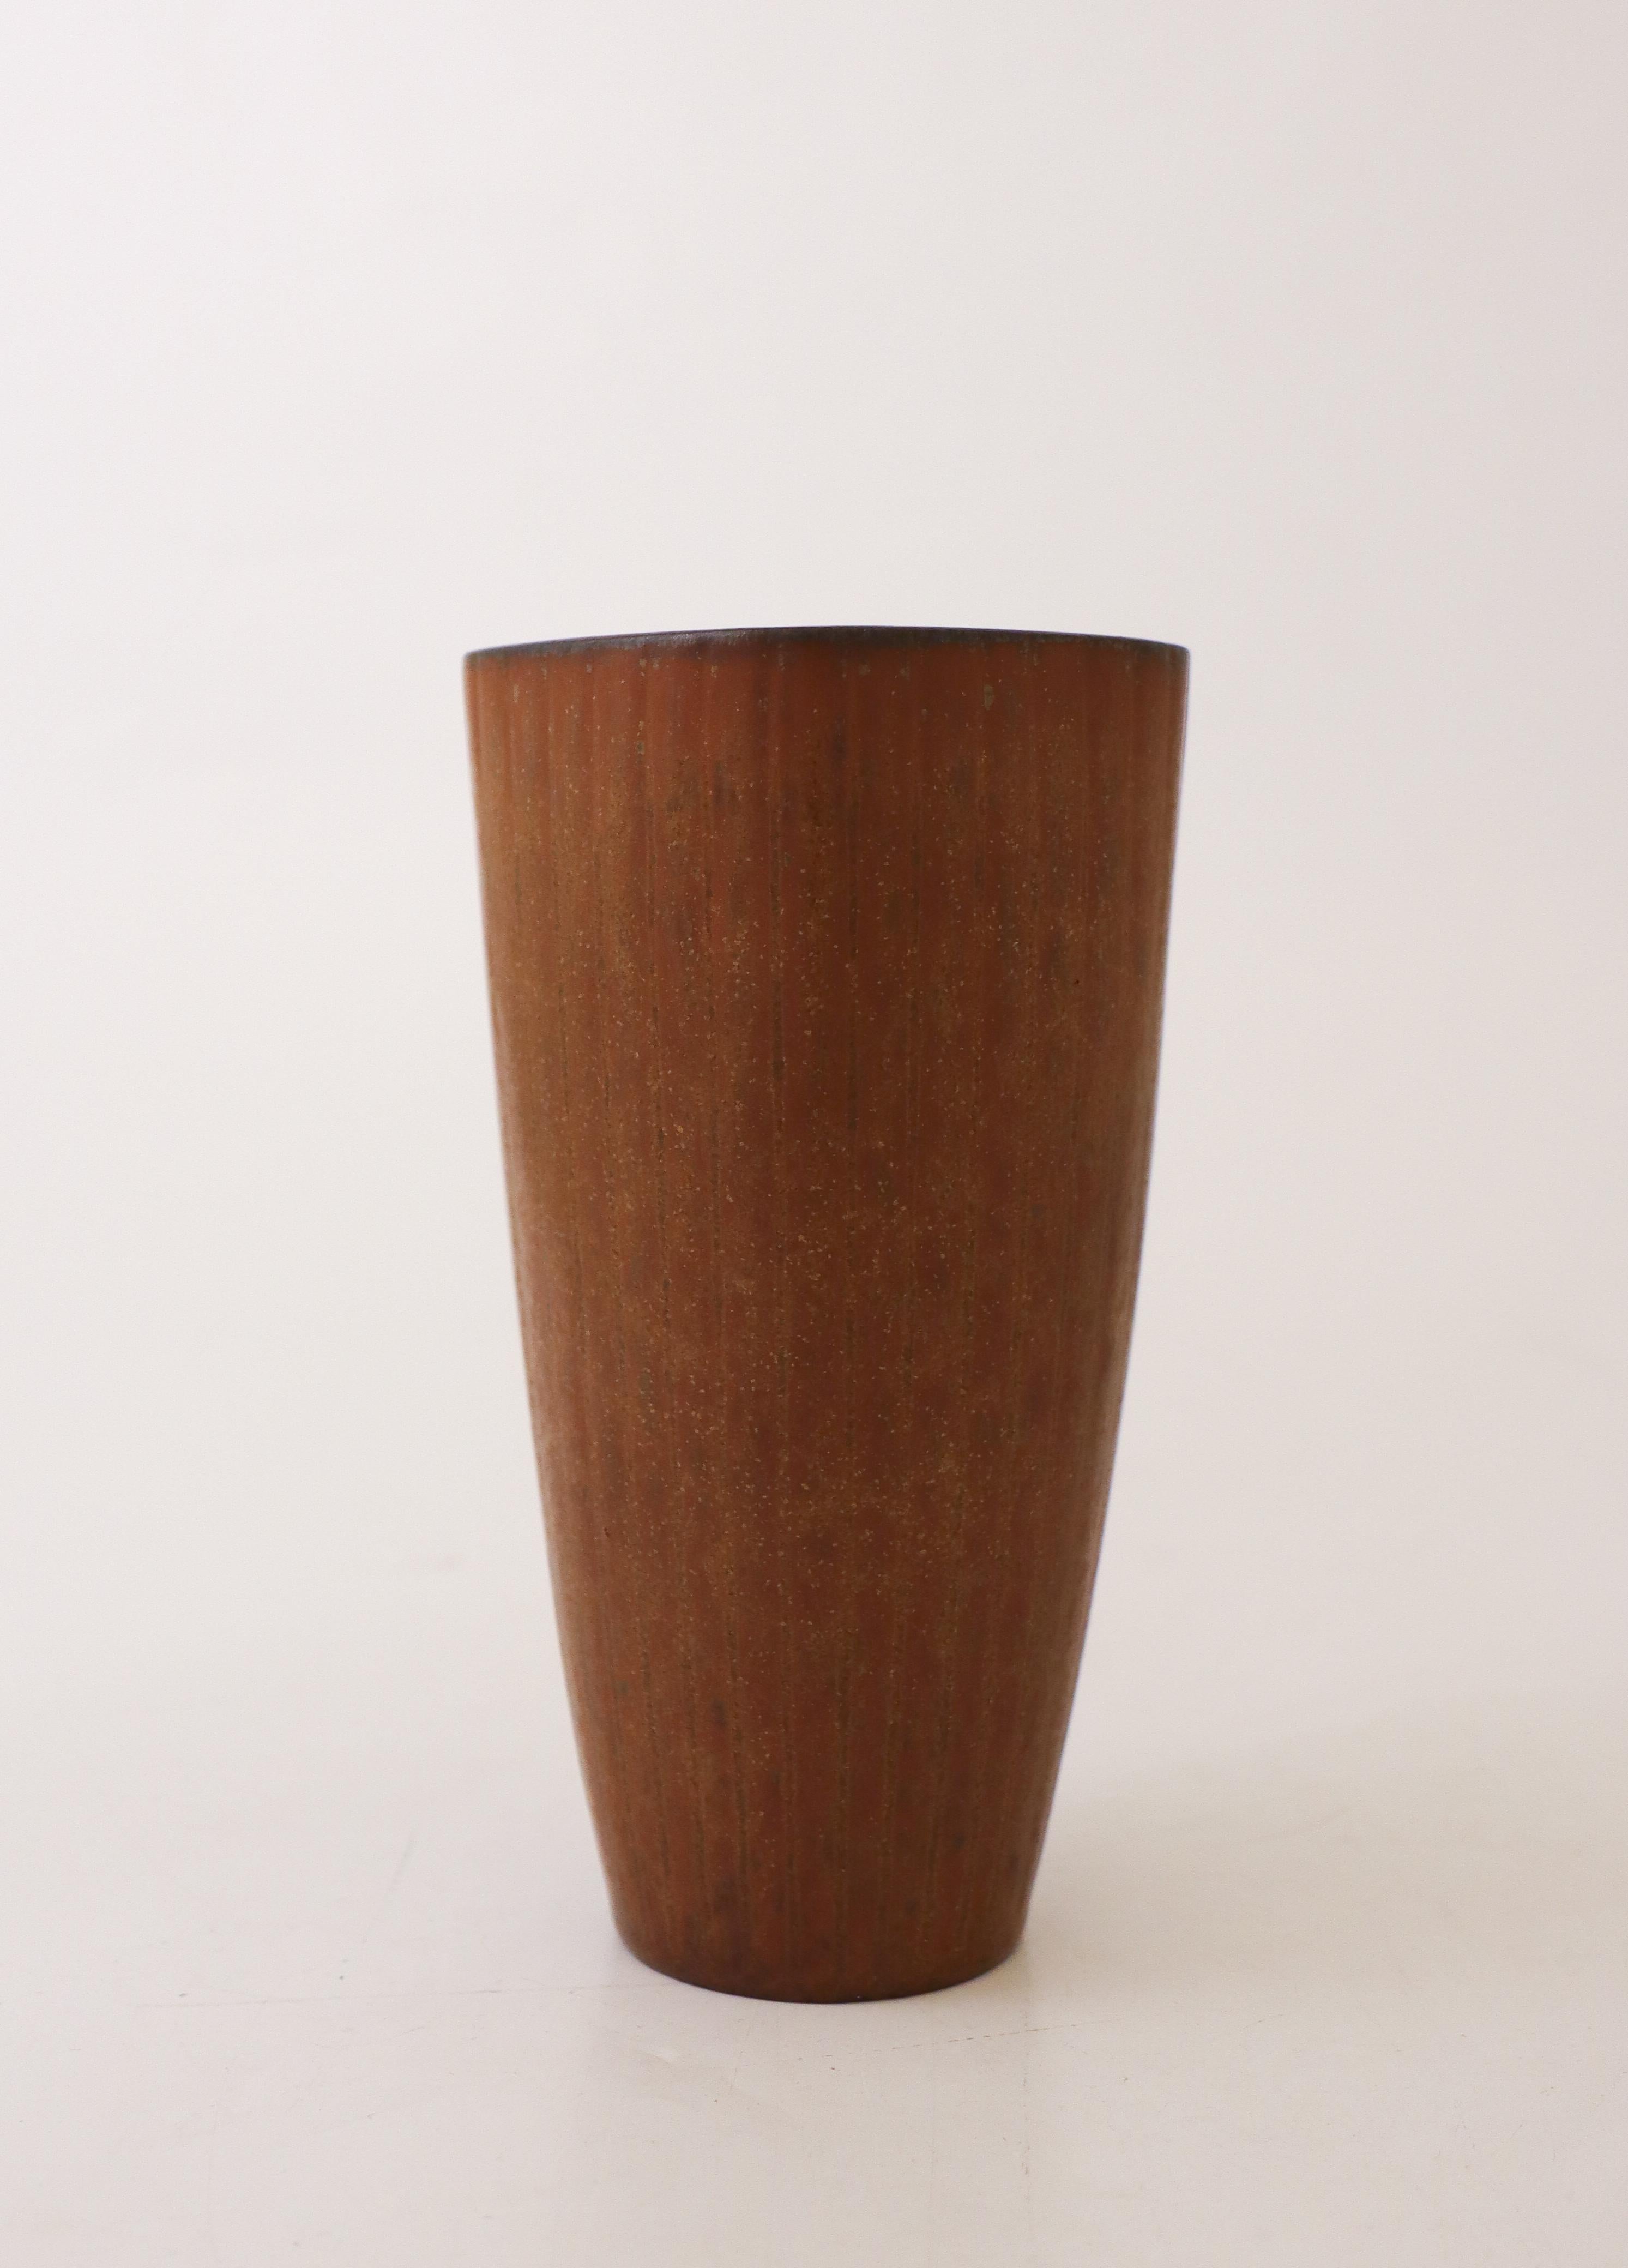 A lovely brown squared vase designed by Gunnar Nylund at Rörstrand, the vase is 15 cm (6